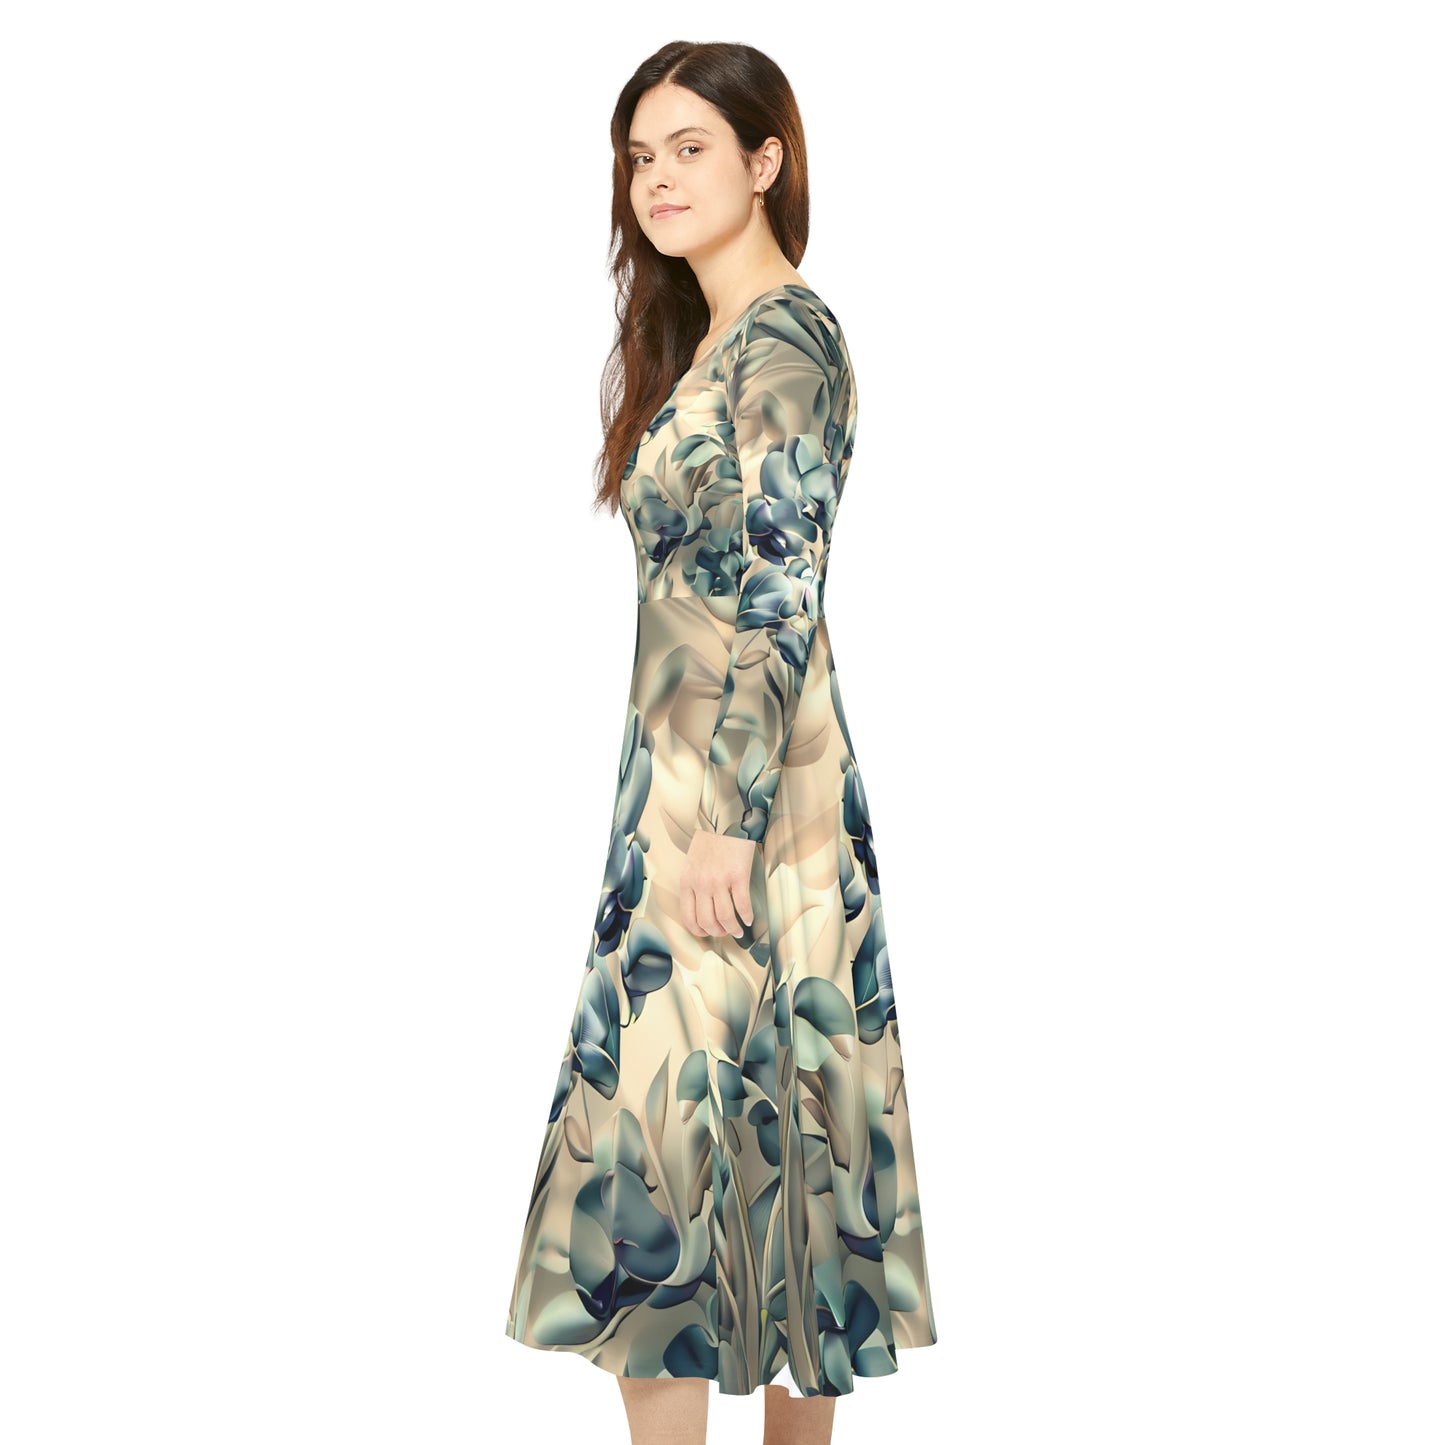 Fashion Women's Long Sleeve Dance Dress - Summer Womens Fashion from Milicia Excelsa Flowers Design